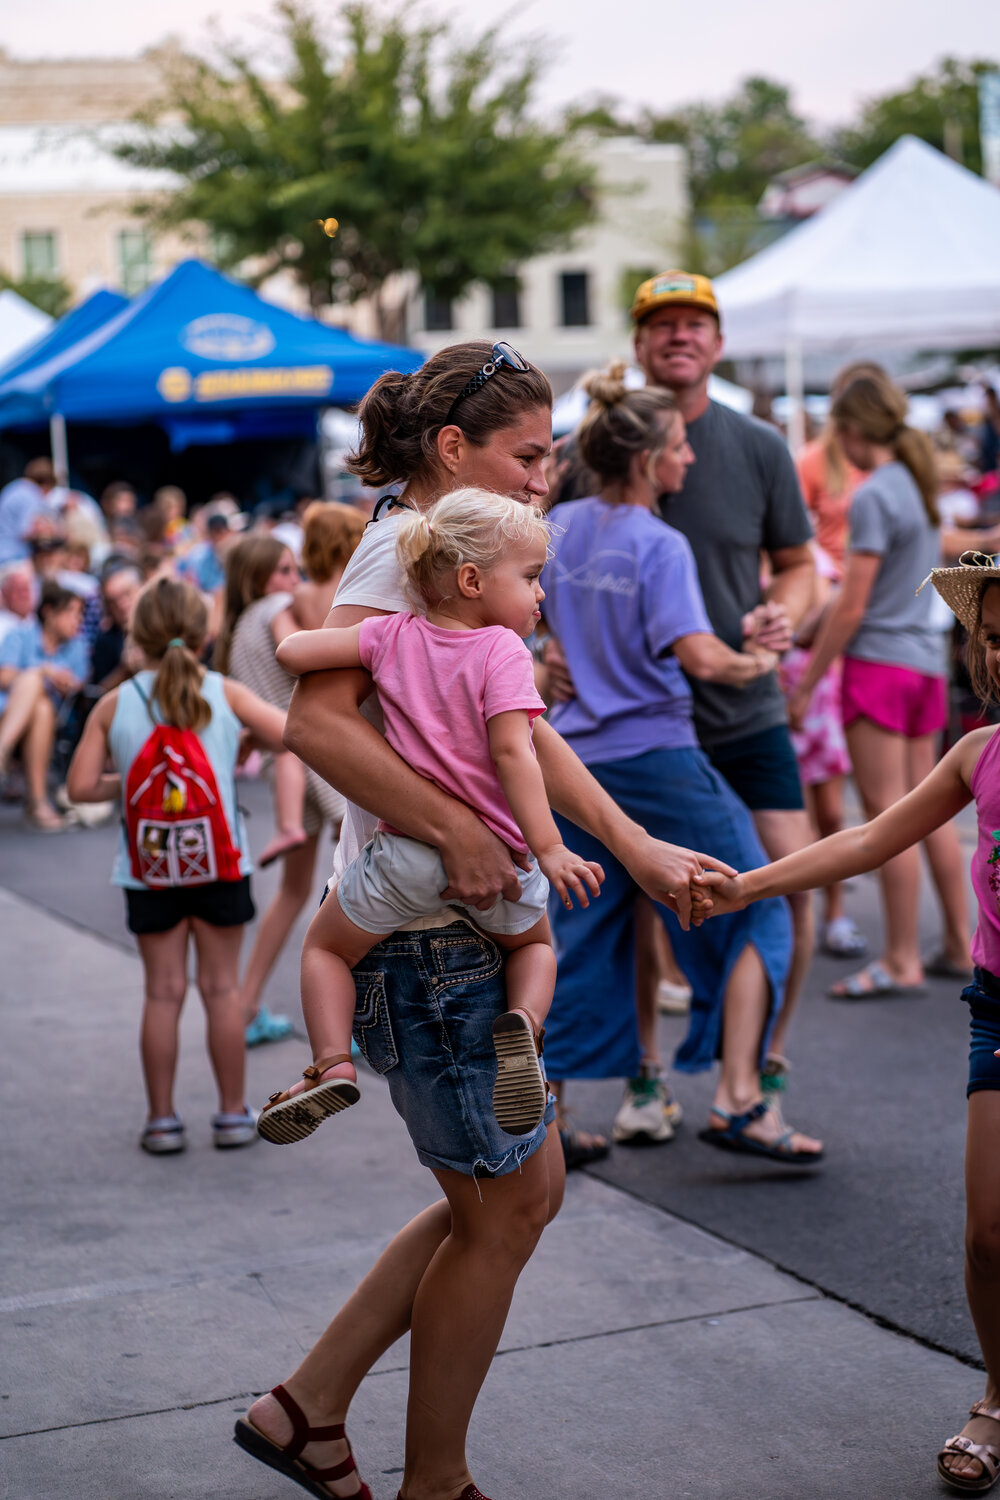 Dancers from all ages enjoyed Dancing night on bridge street Saturday evening